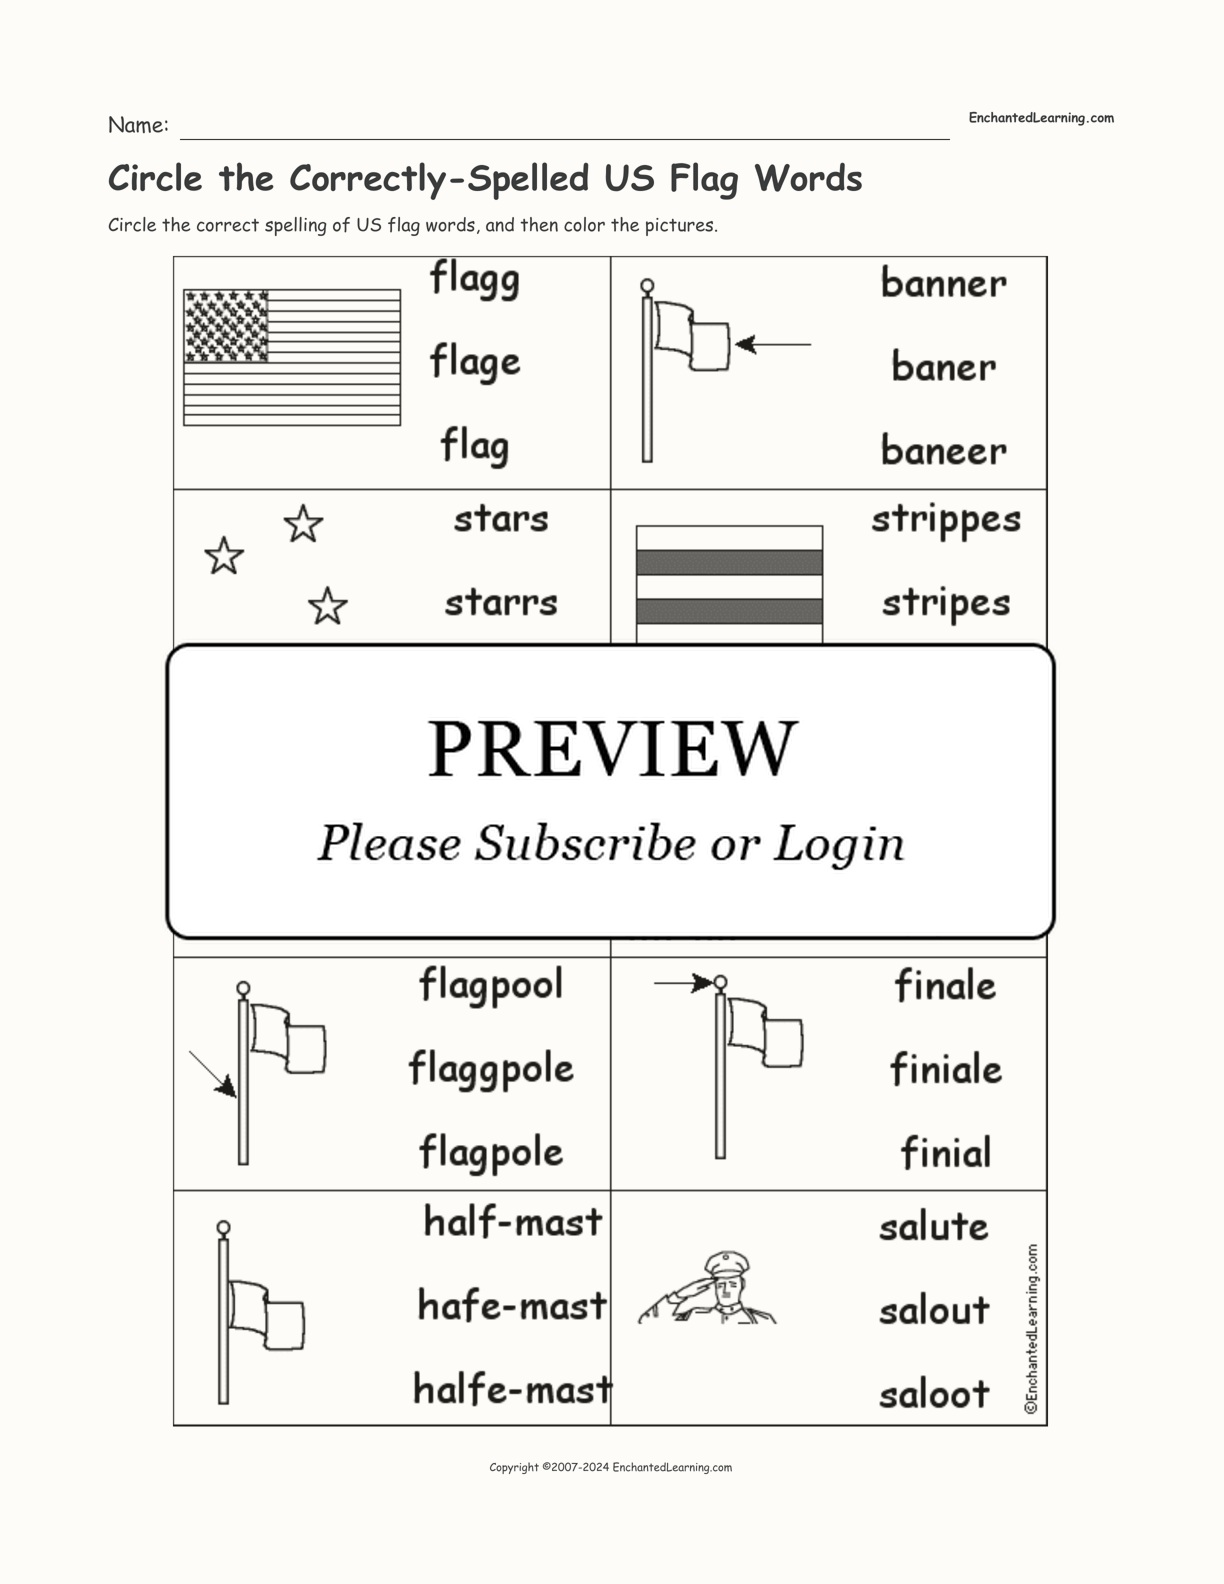 Circle the Correctly-Spelled US Flag Words interactive worksheet page 1